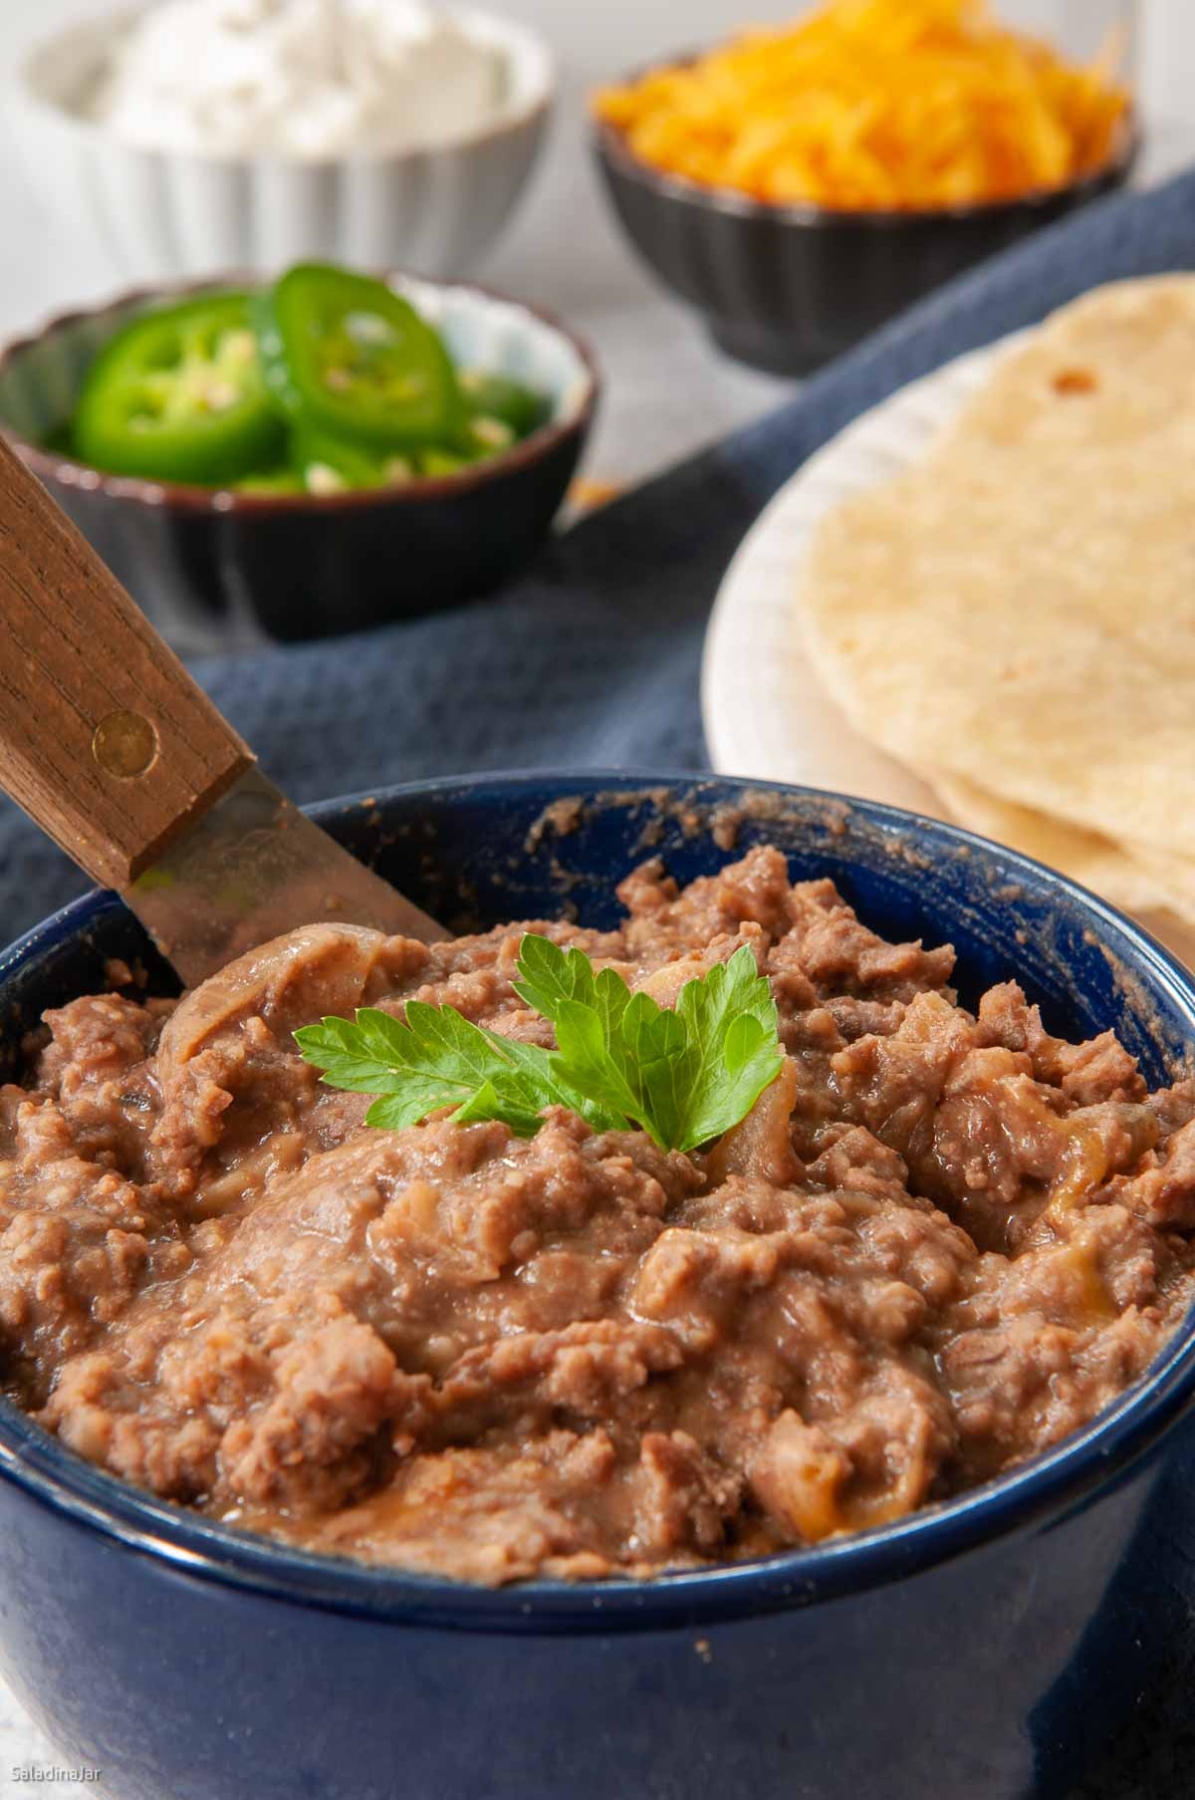 refried beans in a bowl with tortillas, jalapenos, cheese and sour cream